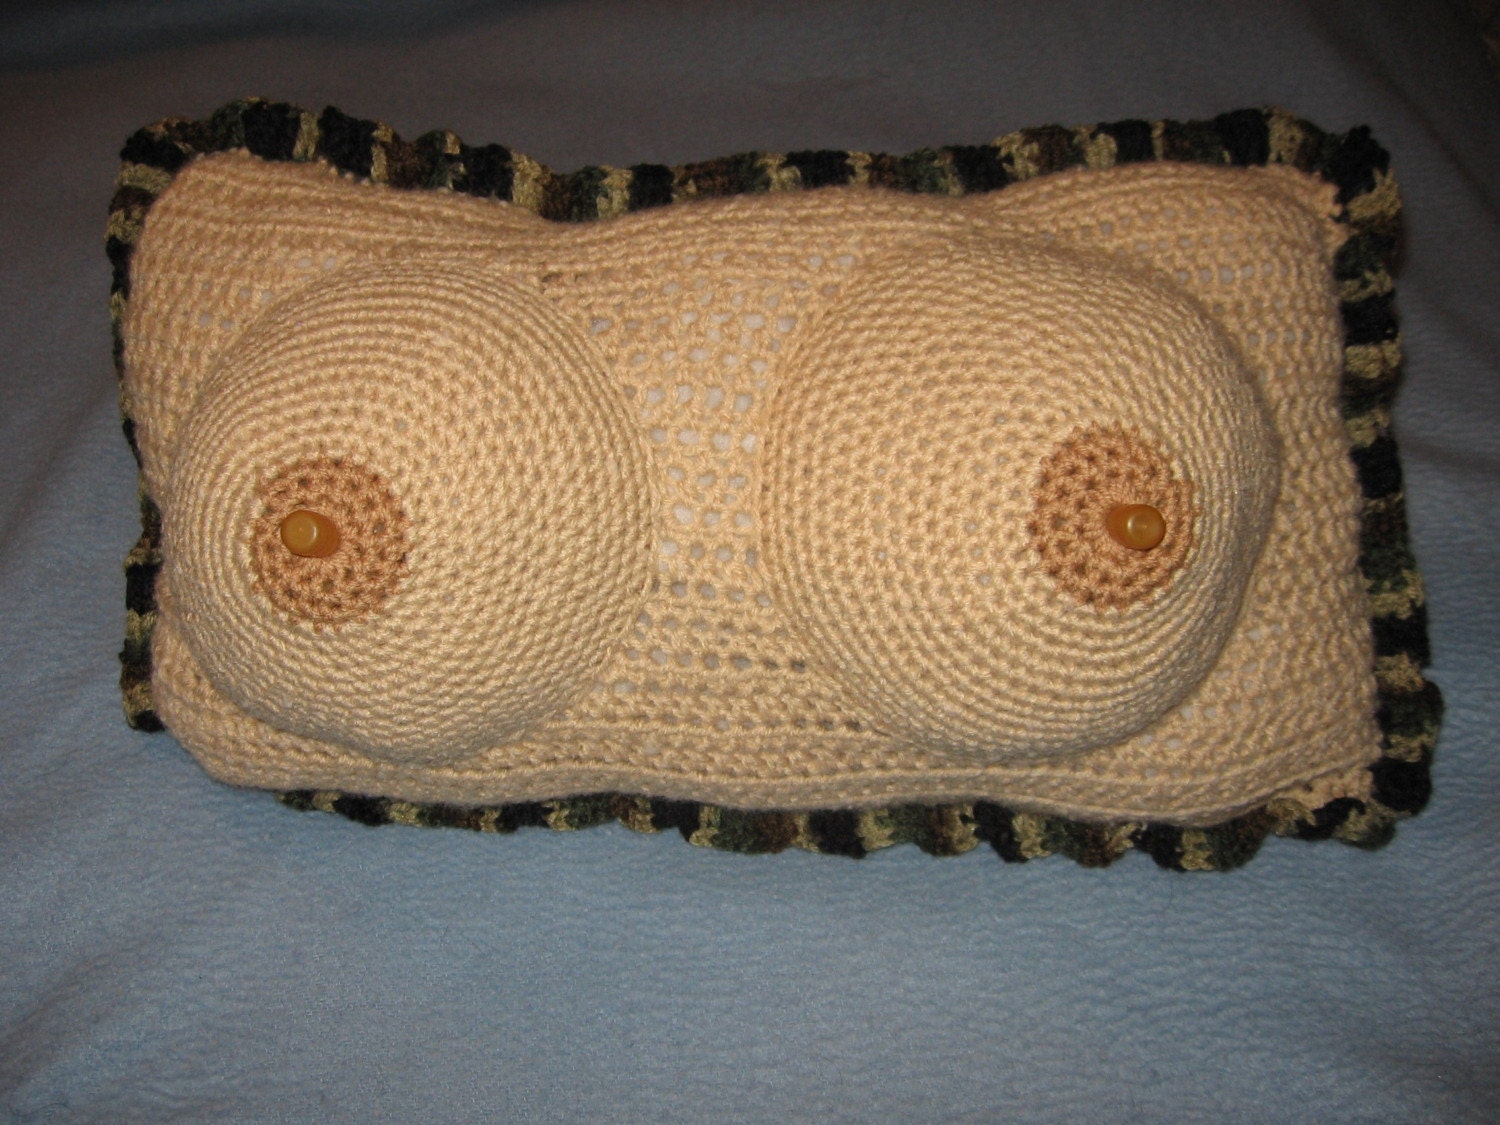 Related Images for Crochet Baby Pillow.